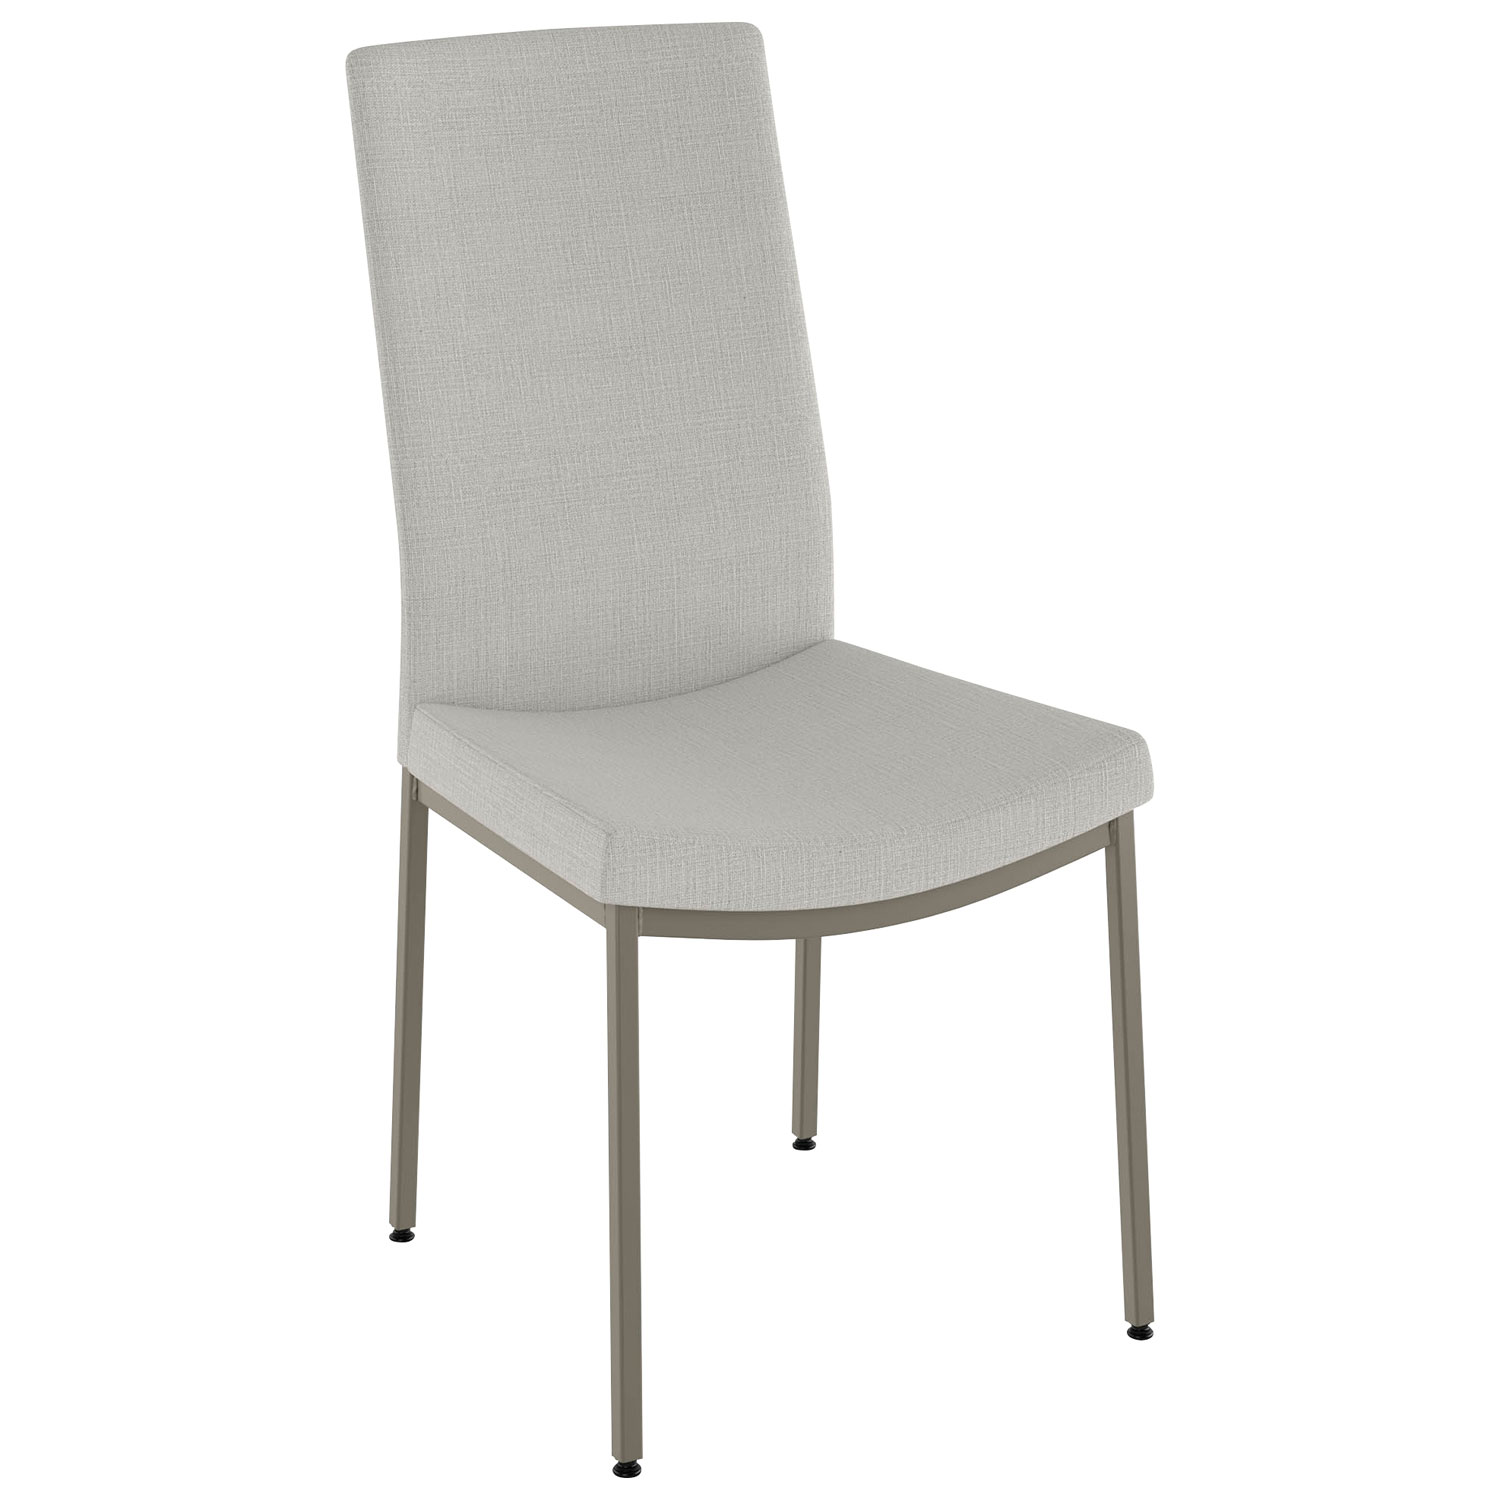 Torres Contemporary Polyester Dining Chair - Pale Grey Beige/Grey